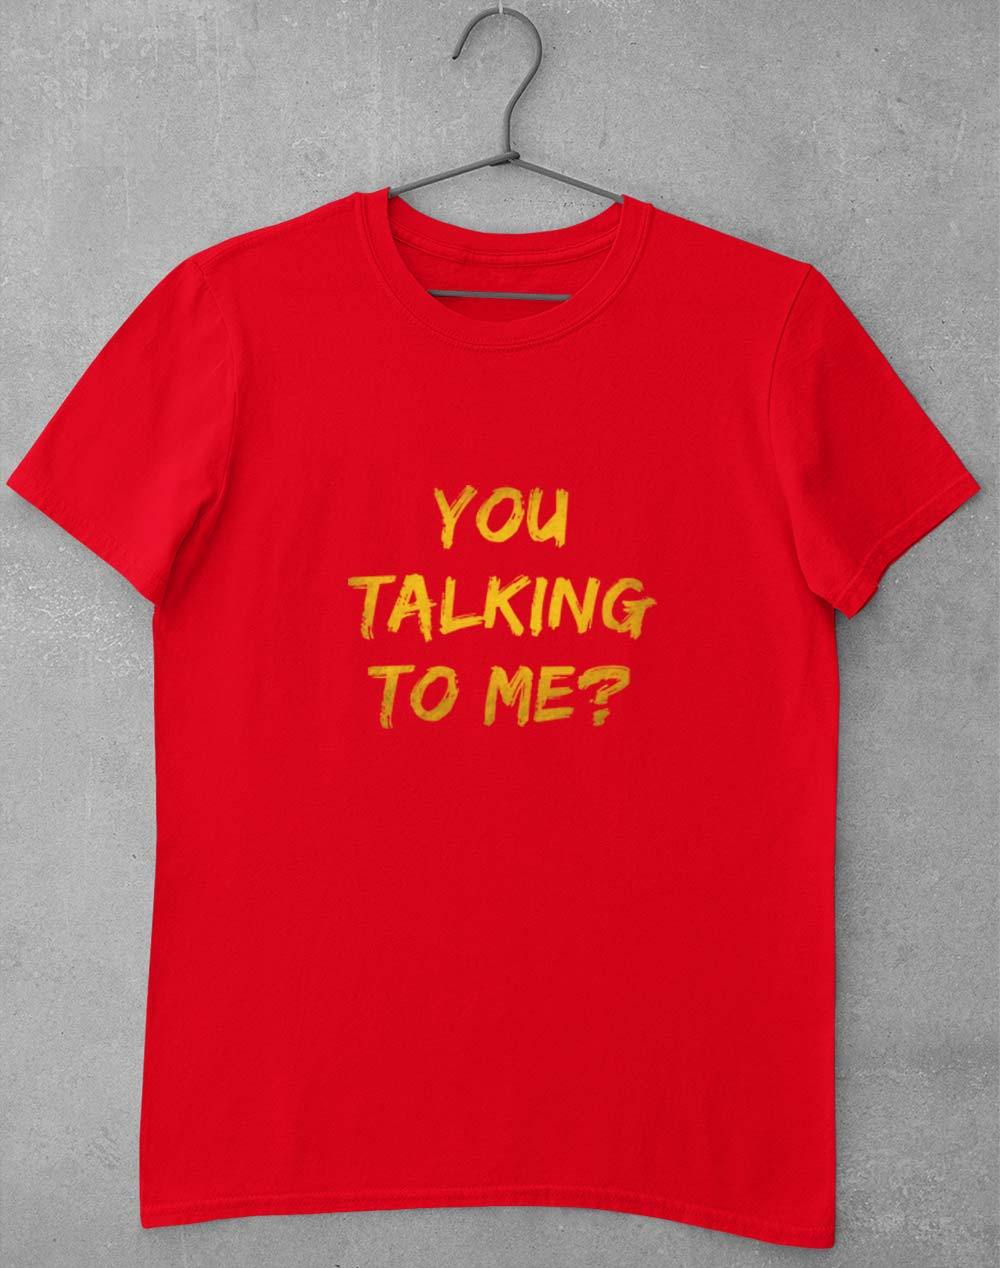 You Talking To Me? T-Shirt S / Red  - Off World Tees